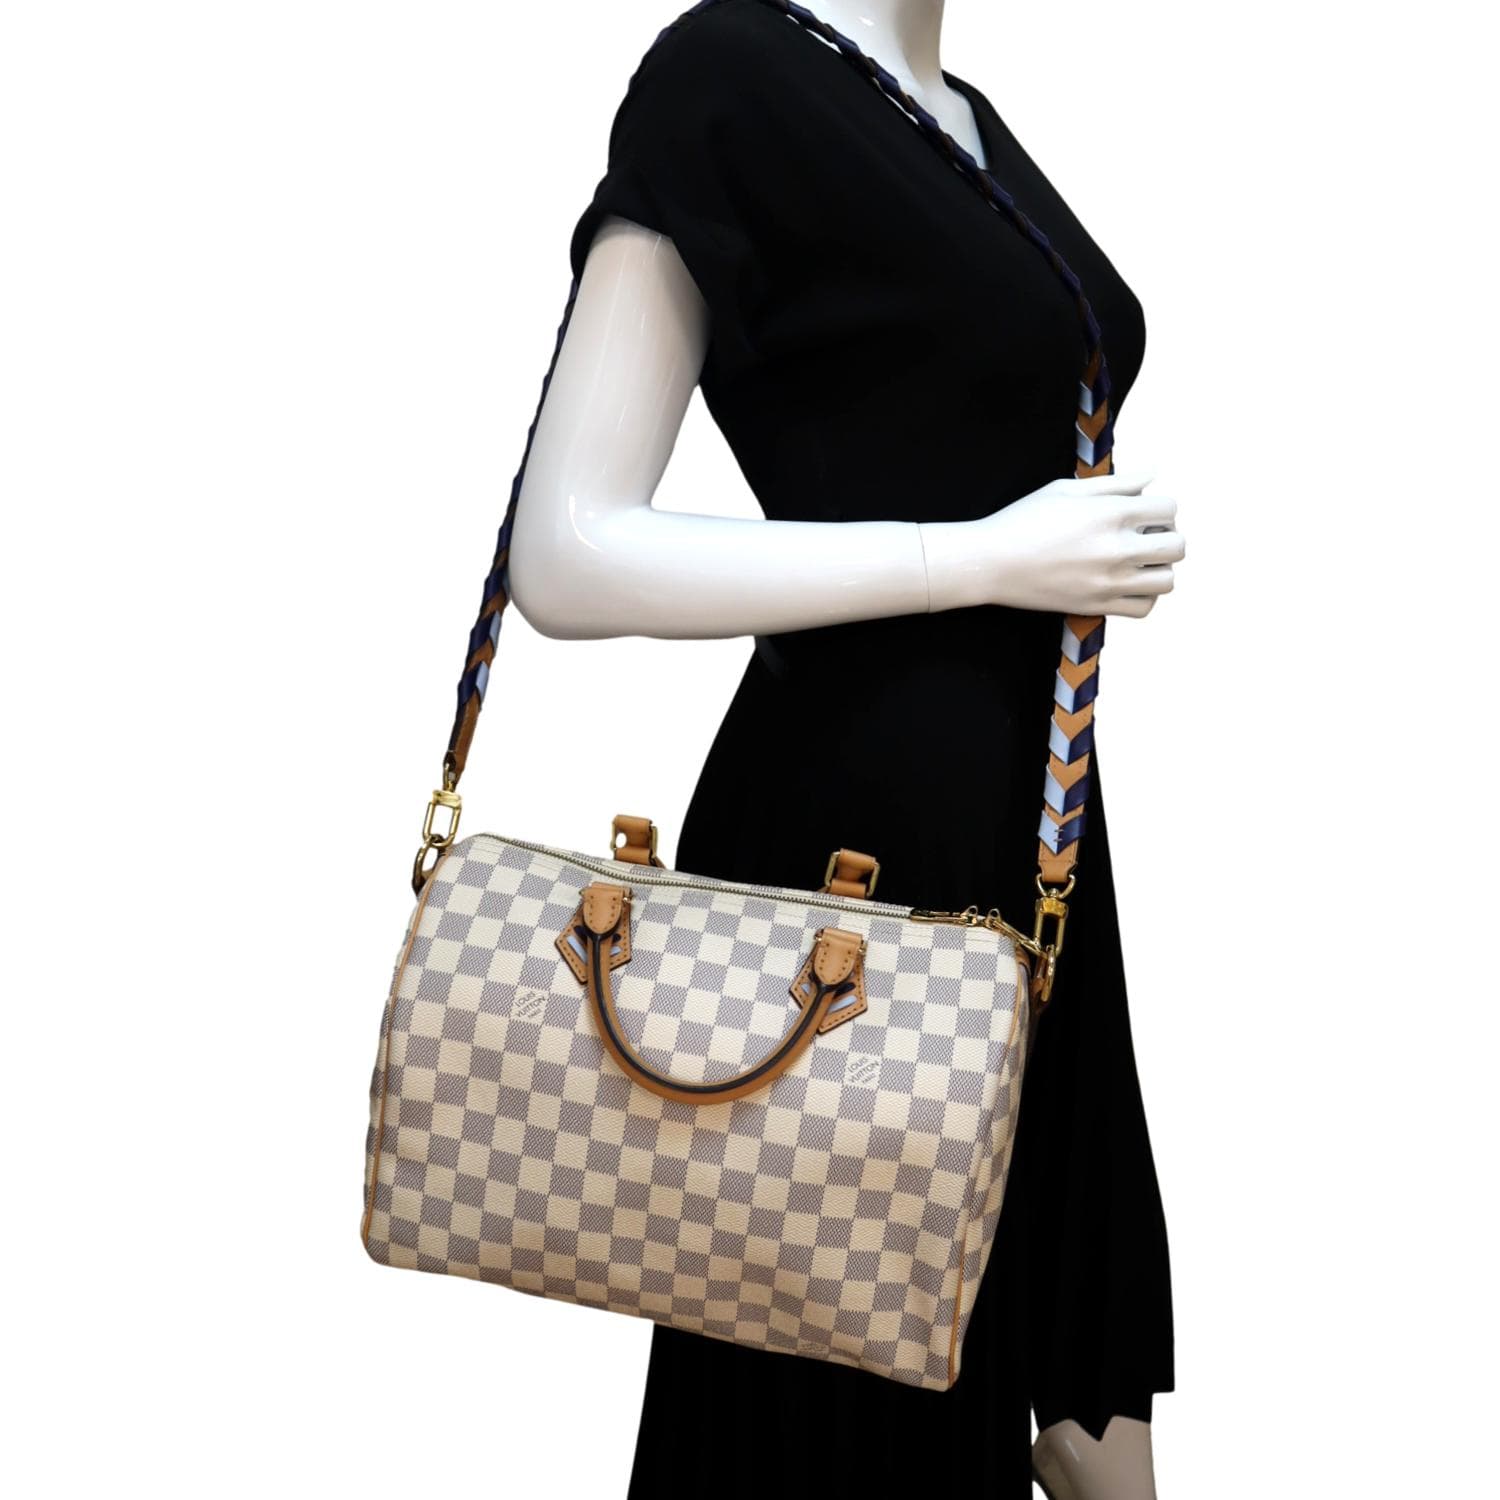 How To Spot Authentic Louis Vuitton Speedy 30 Damier Azur Bag and Where to  Find Date Code 